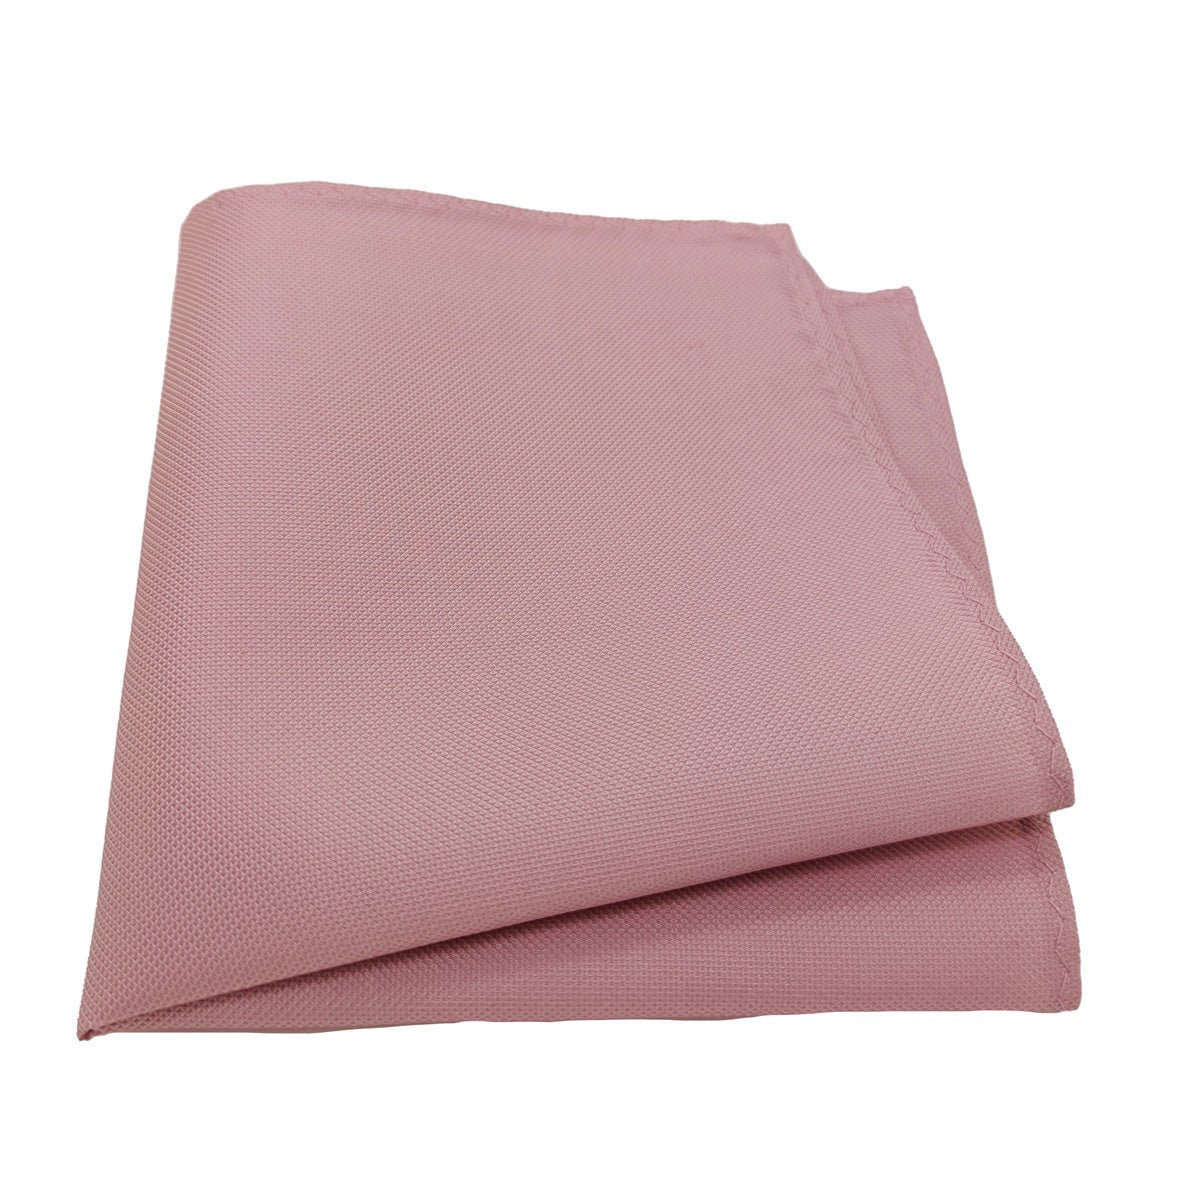 Dusty Rose Silk Pocket Square - Wedding Pocket Square - - Swagger & Swoon